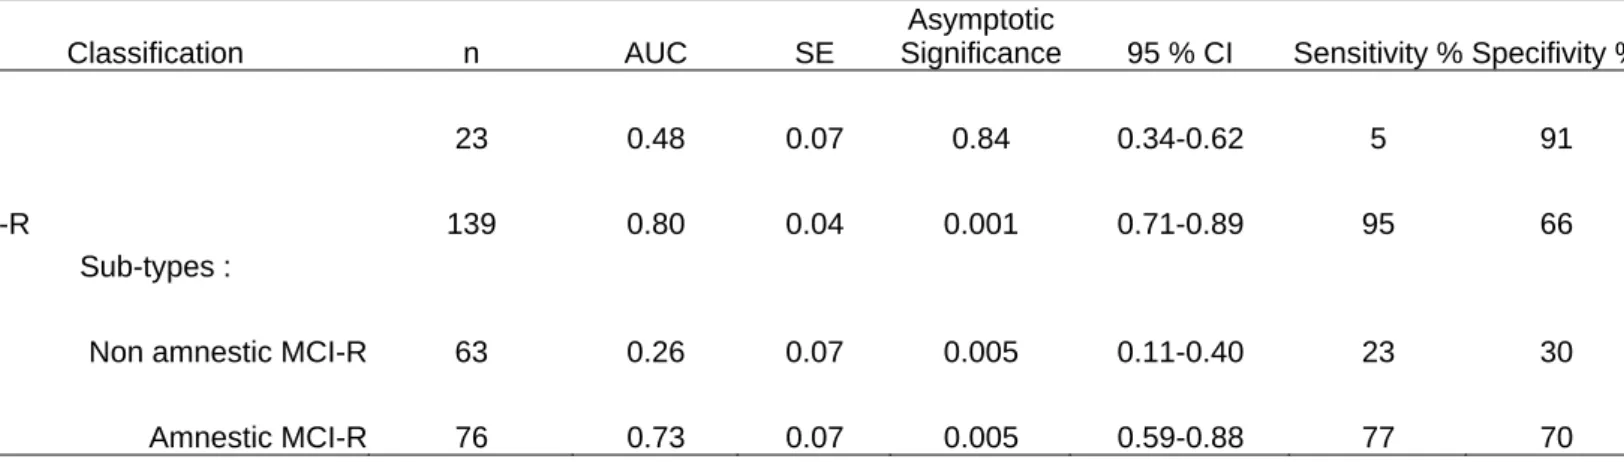 Table 2. Receiver Operating Characteristics (ROC) analyses of the discriminability of MCI, MCI-R and  MCI-R sub-types (amnestic and non-amnestic) for the prediction of dementia after 2 years